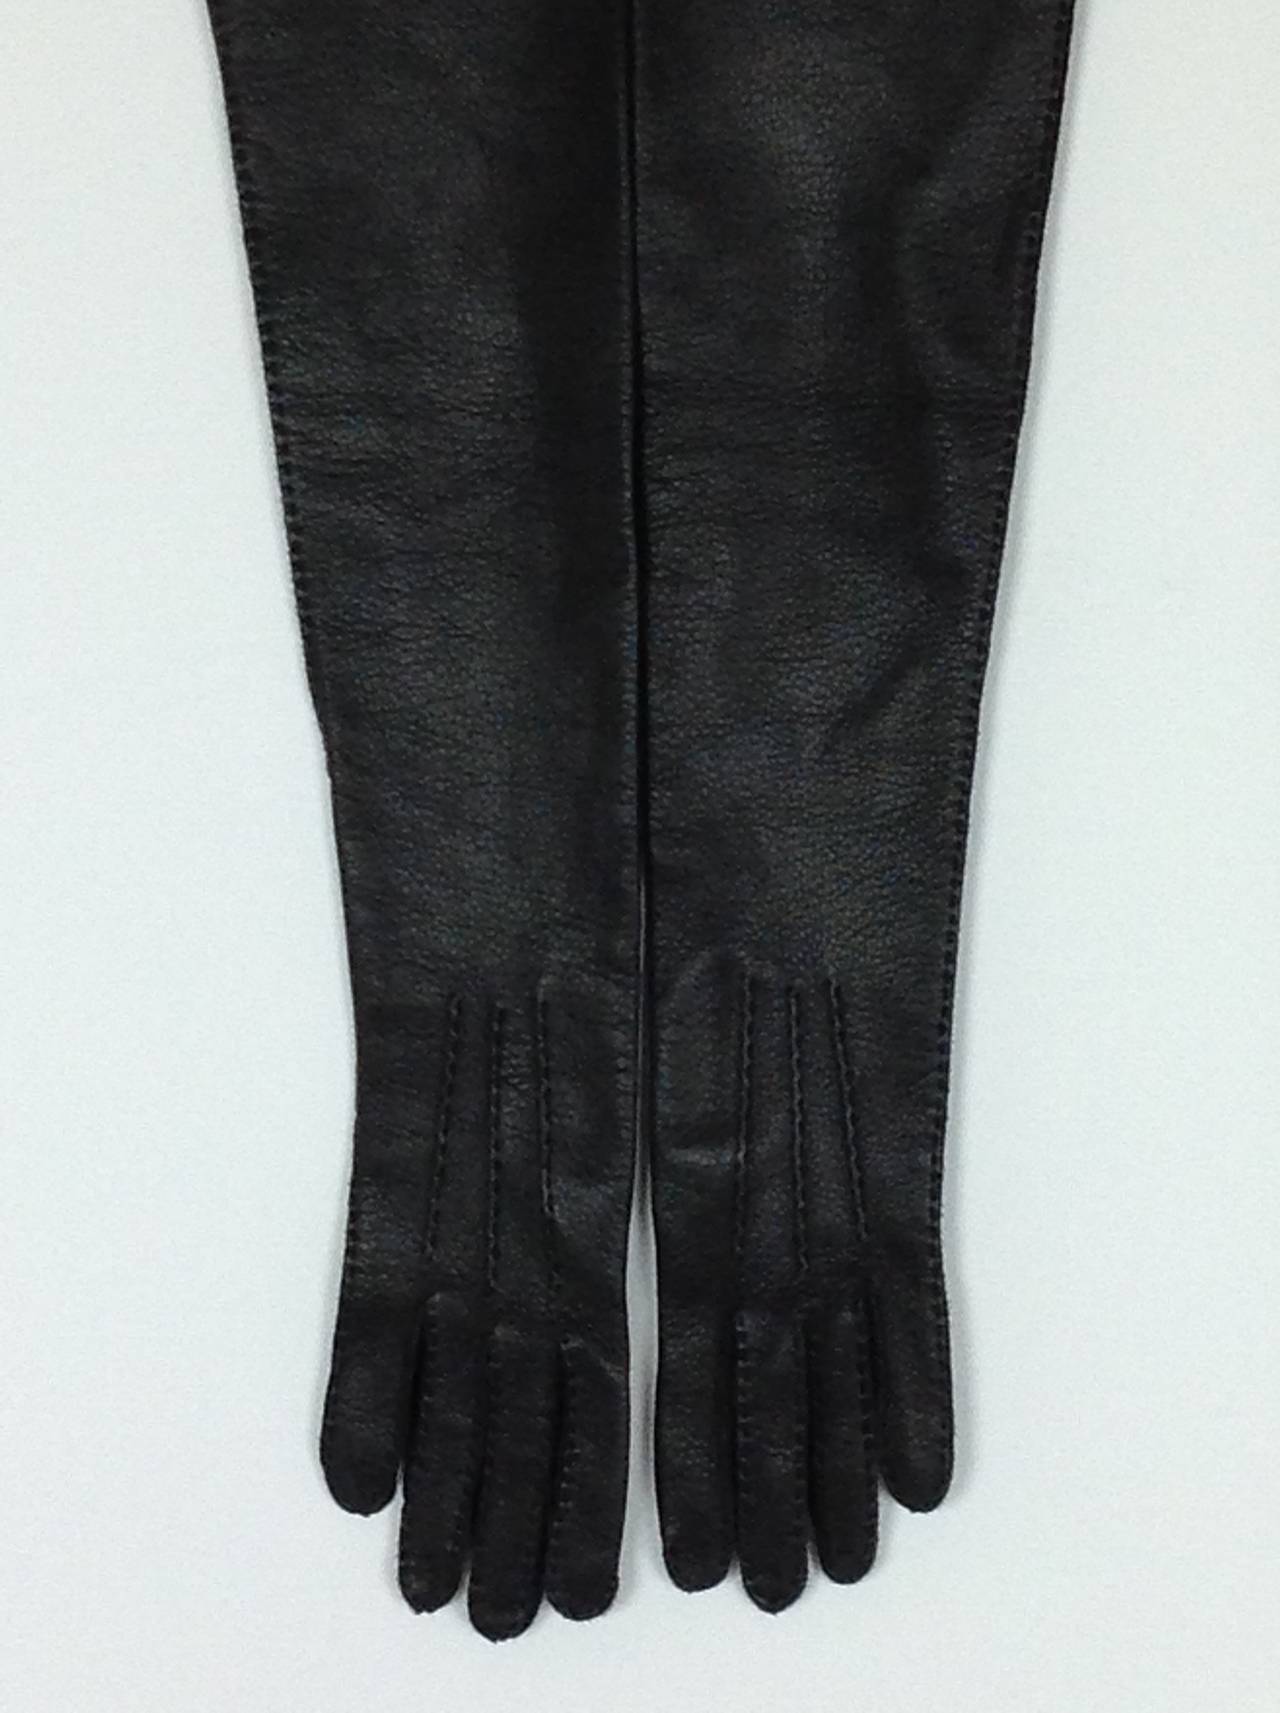 Sexy textured black leather Marni opera gloves.
Unlined buttery soft deerskin gloves.    
Handpicked stitching on the fingers and outside seam.
24